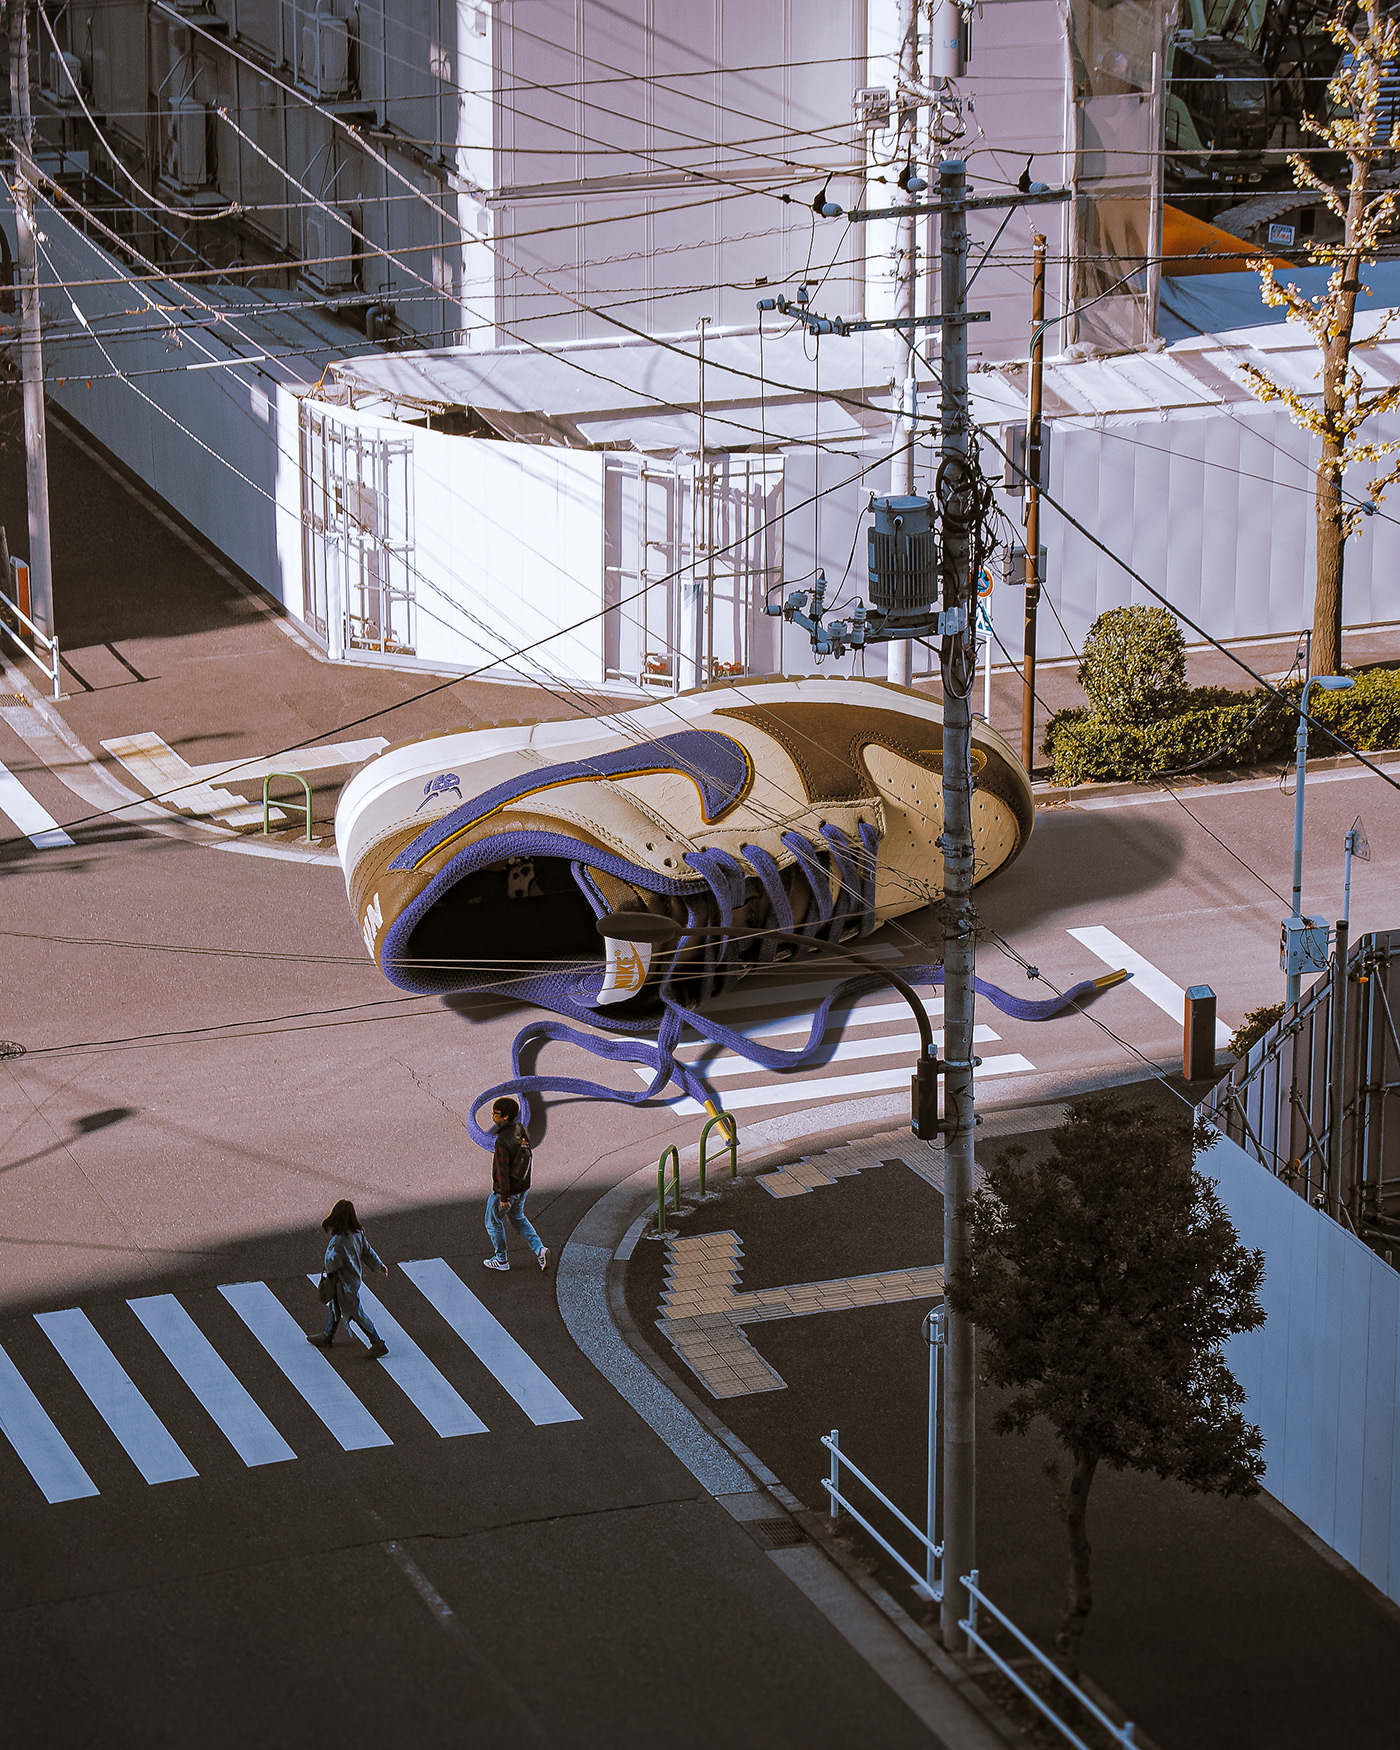 Giant sneaker photo composite on the street in Japan . Retouching using Photoshop